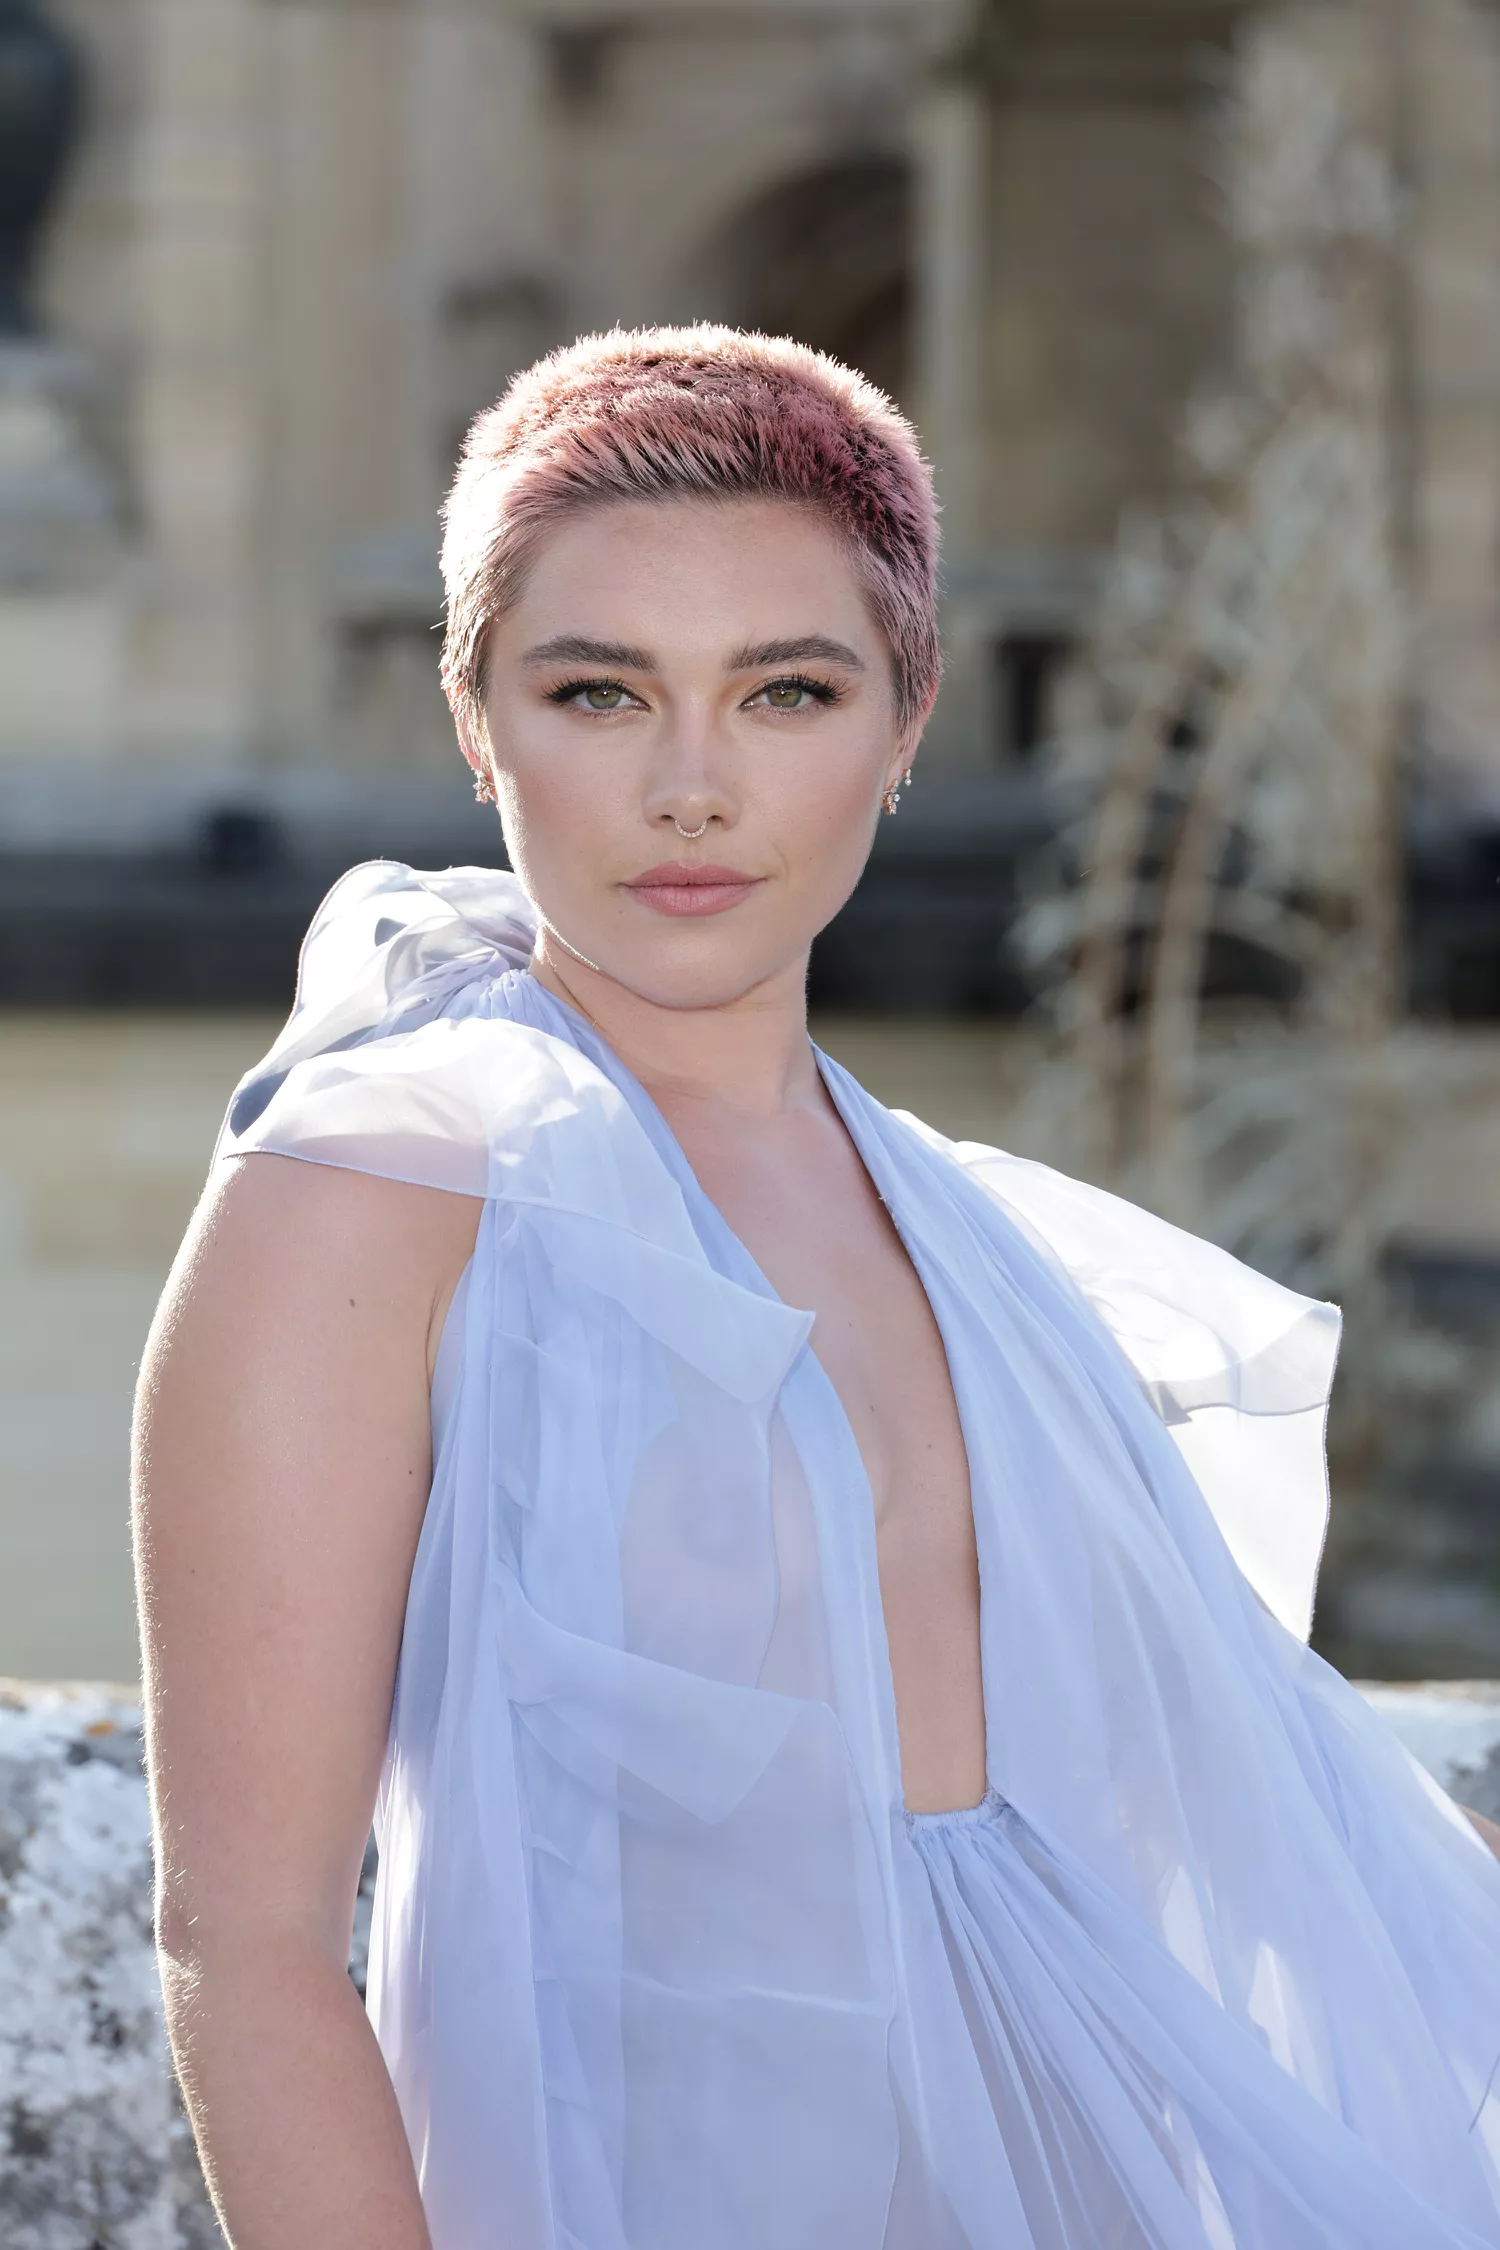 Florence Pugh’s Take On Summer Pastels Included a Totally Sheer Lilac Dress and a Pink Buzzcut